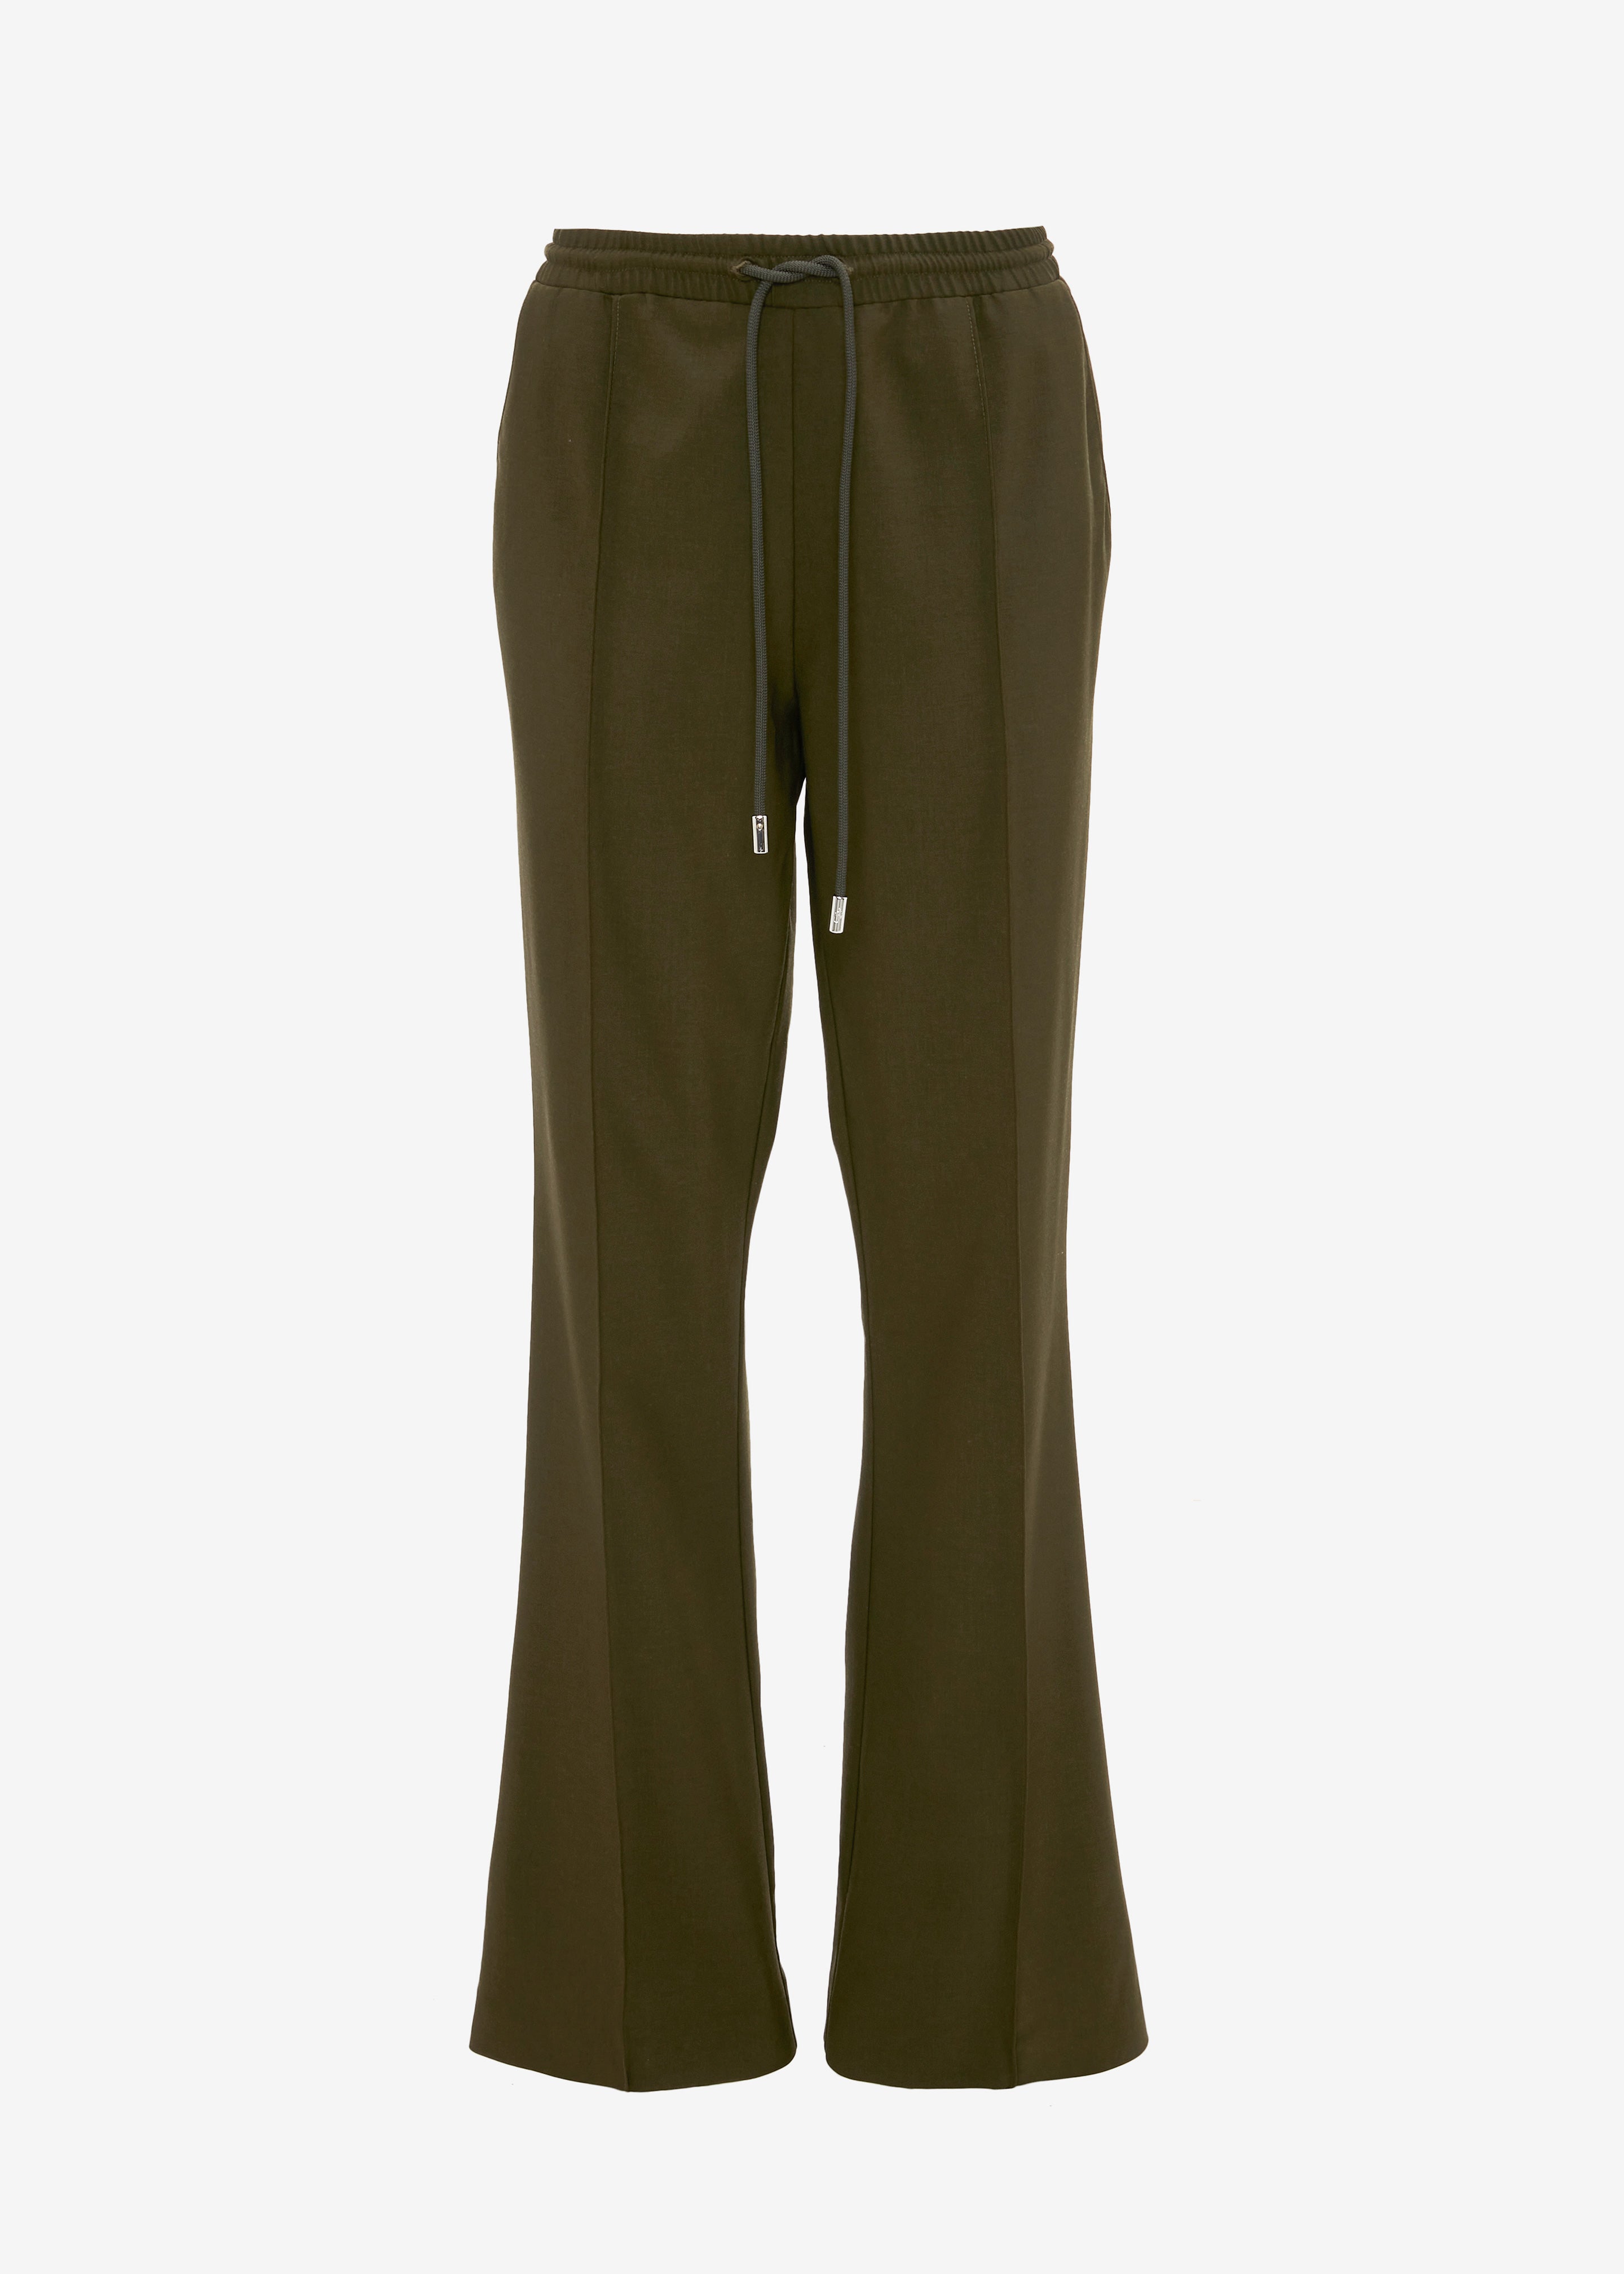 JW Anderson Drawstring Waist Tailored Trousers - Olive - 10